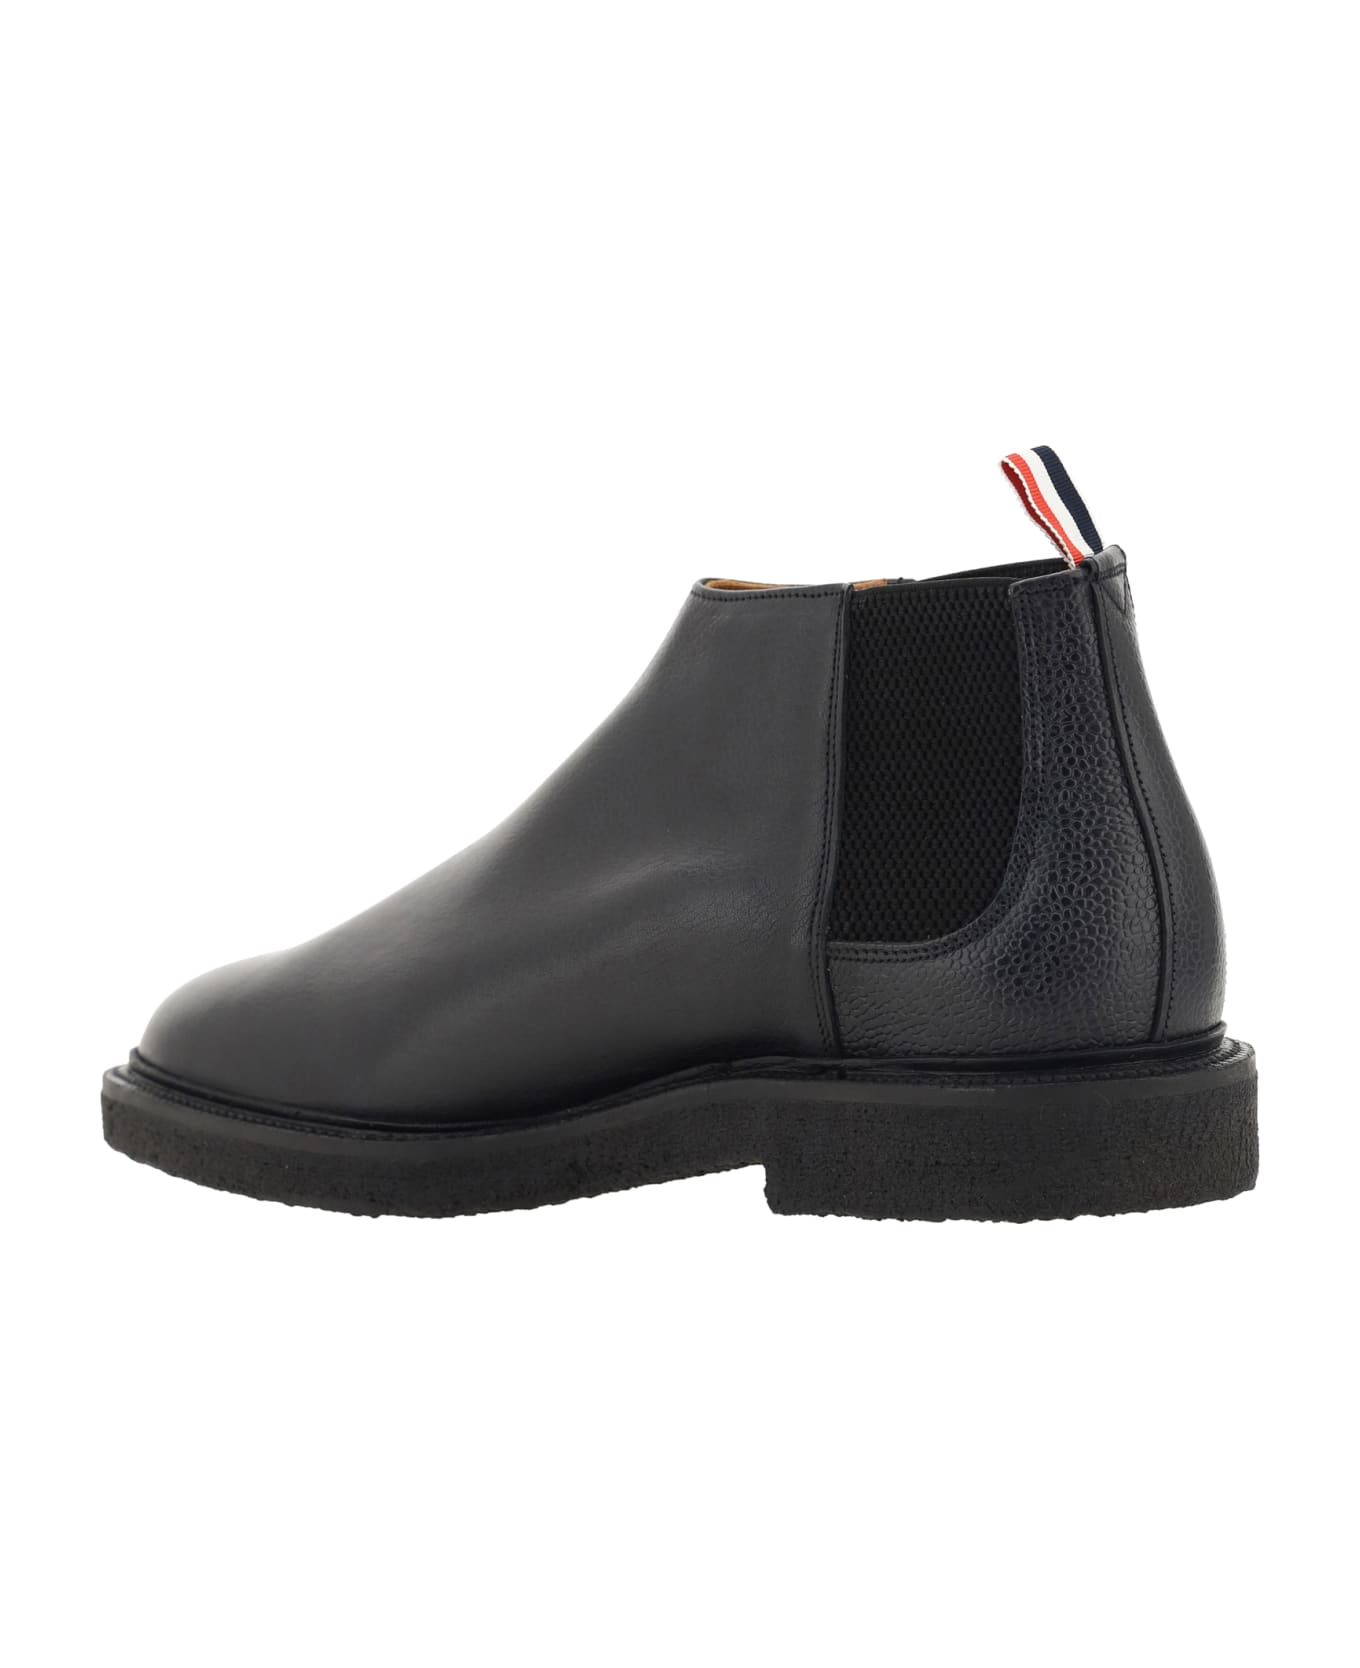 Thom Browne Ankle Boots - Black